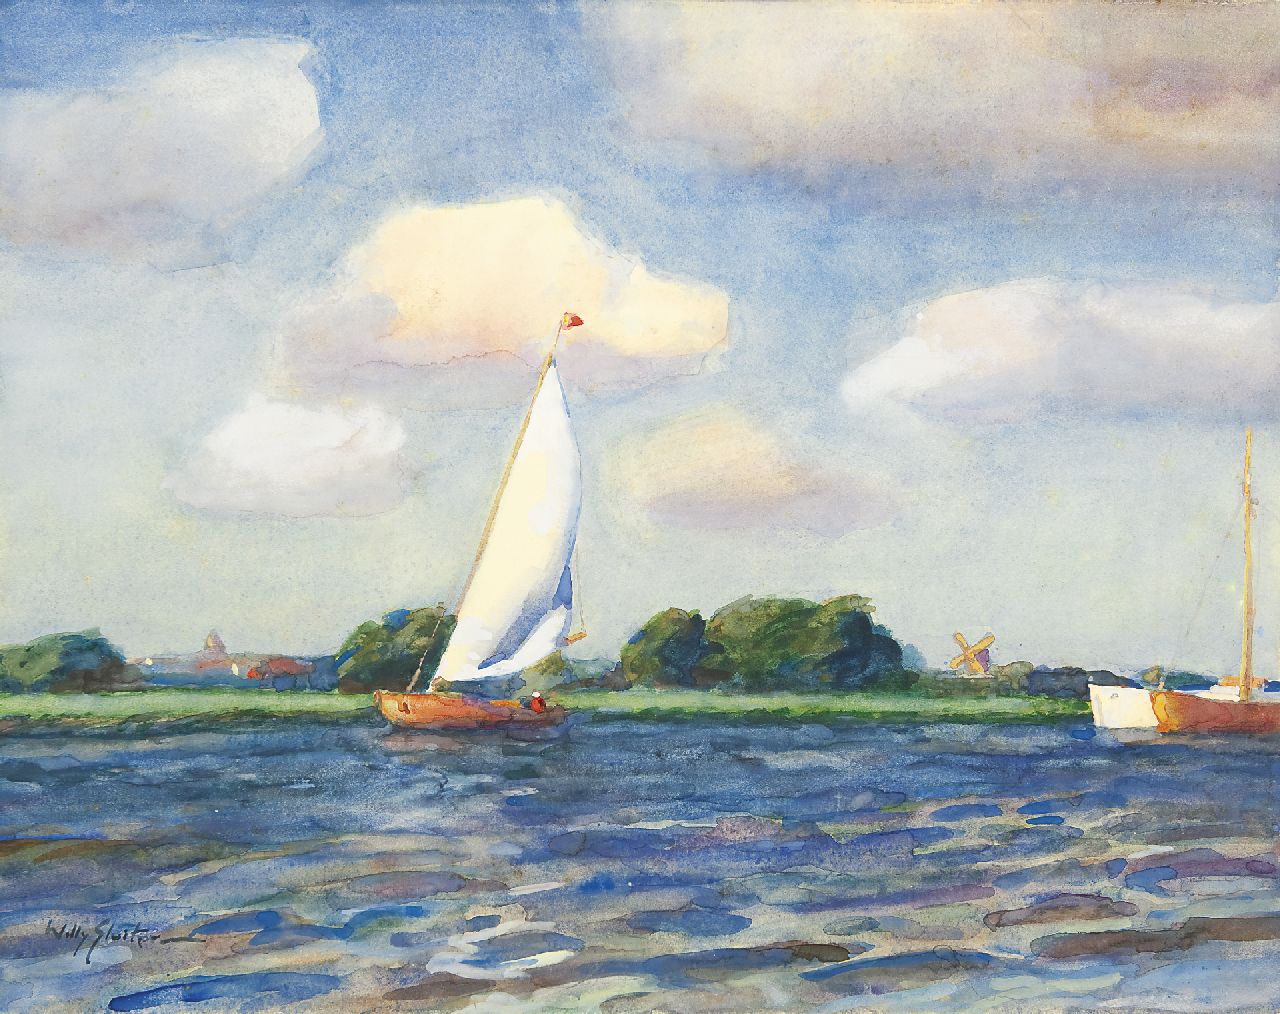 Sluiter J.W.  | Jan Willem 'Willy' Sluiter, Sailing boat on a lake, Olympic Games 1928, watercolour on paper laid down on board 50.8 x 65.6 cm, signed l.l.